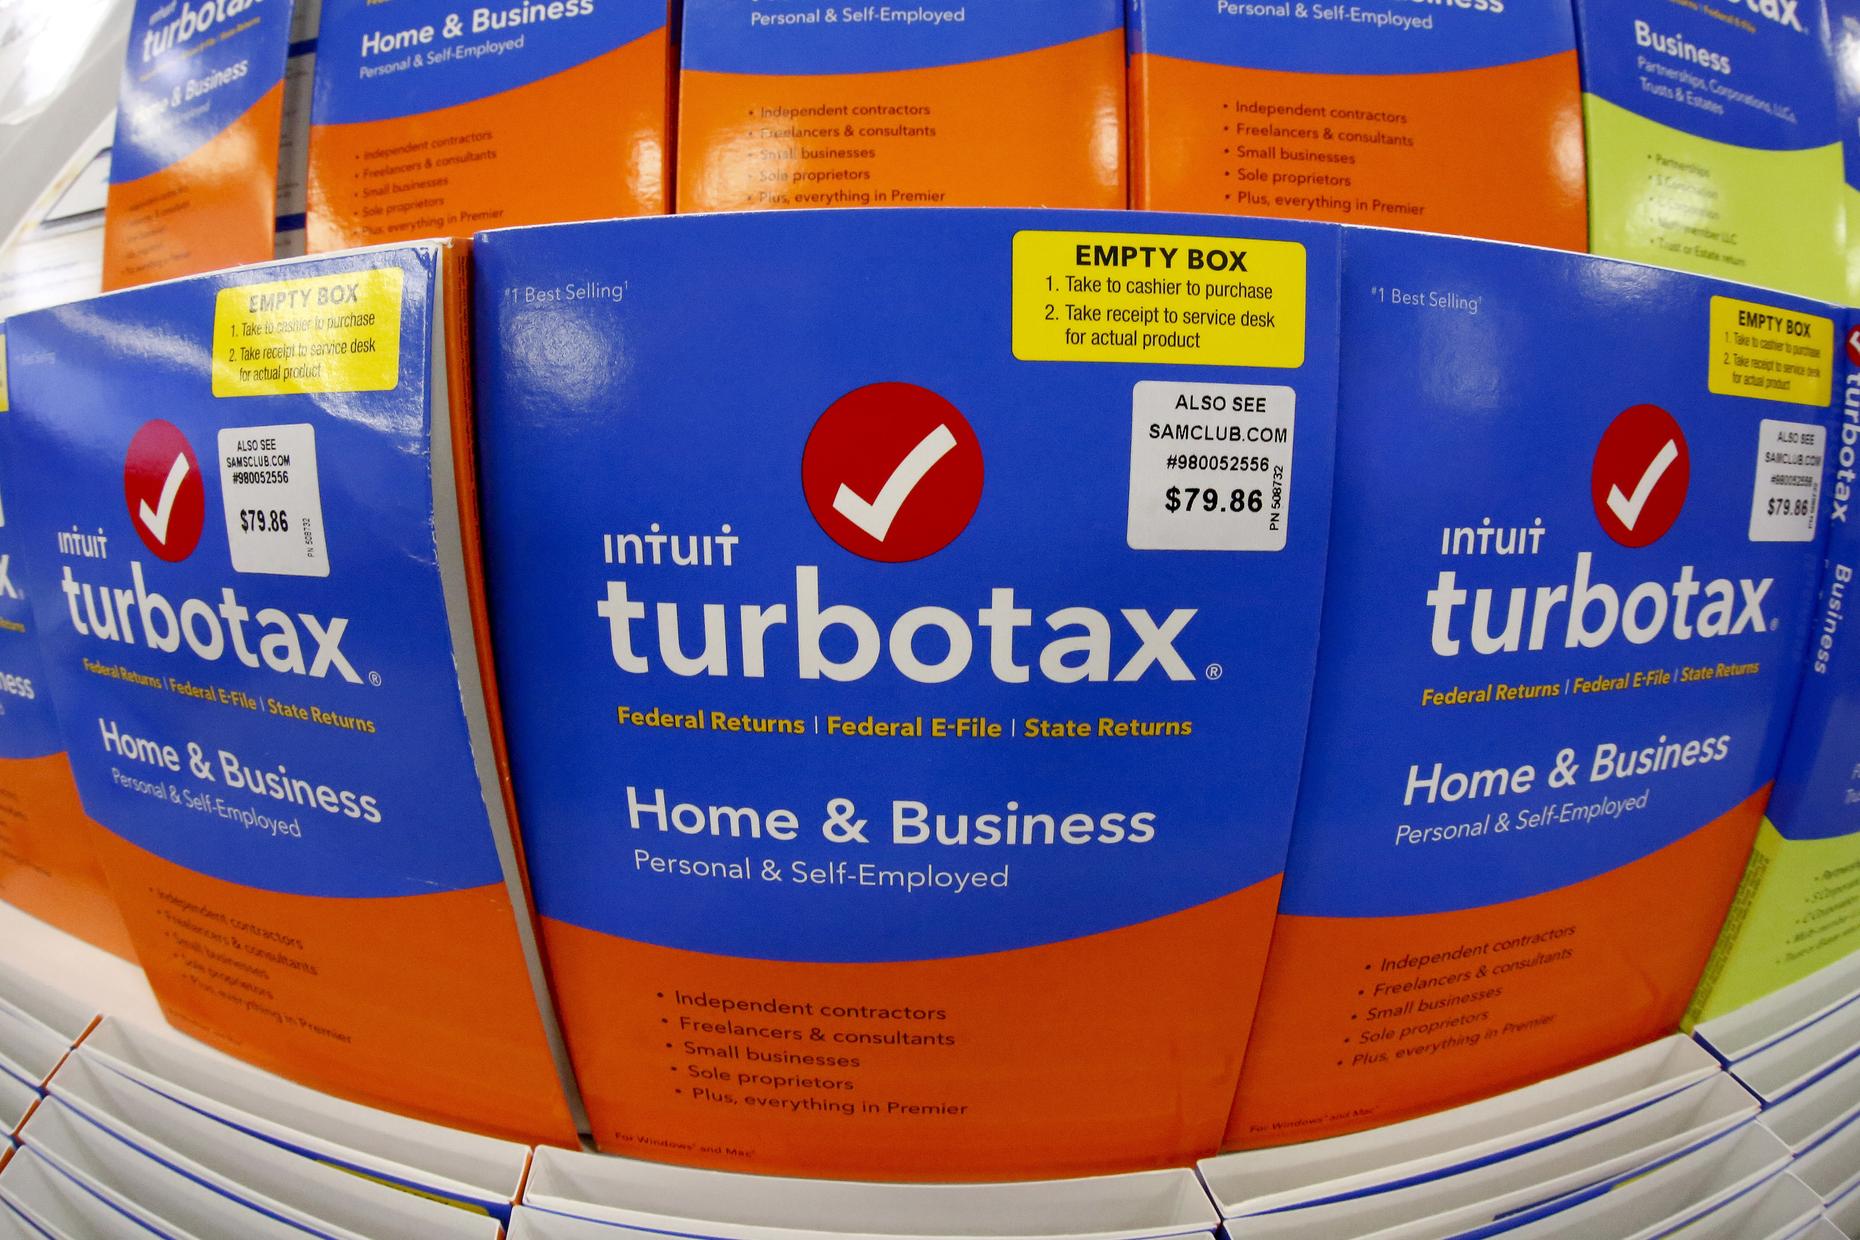 New York Regulator Launches Investigation Into TurboTax Maker Intuit